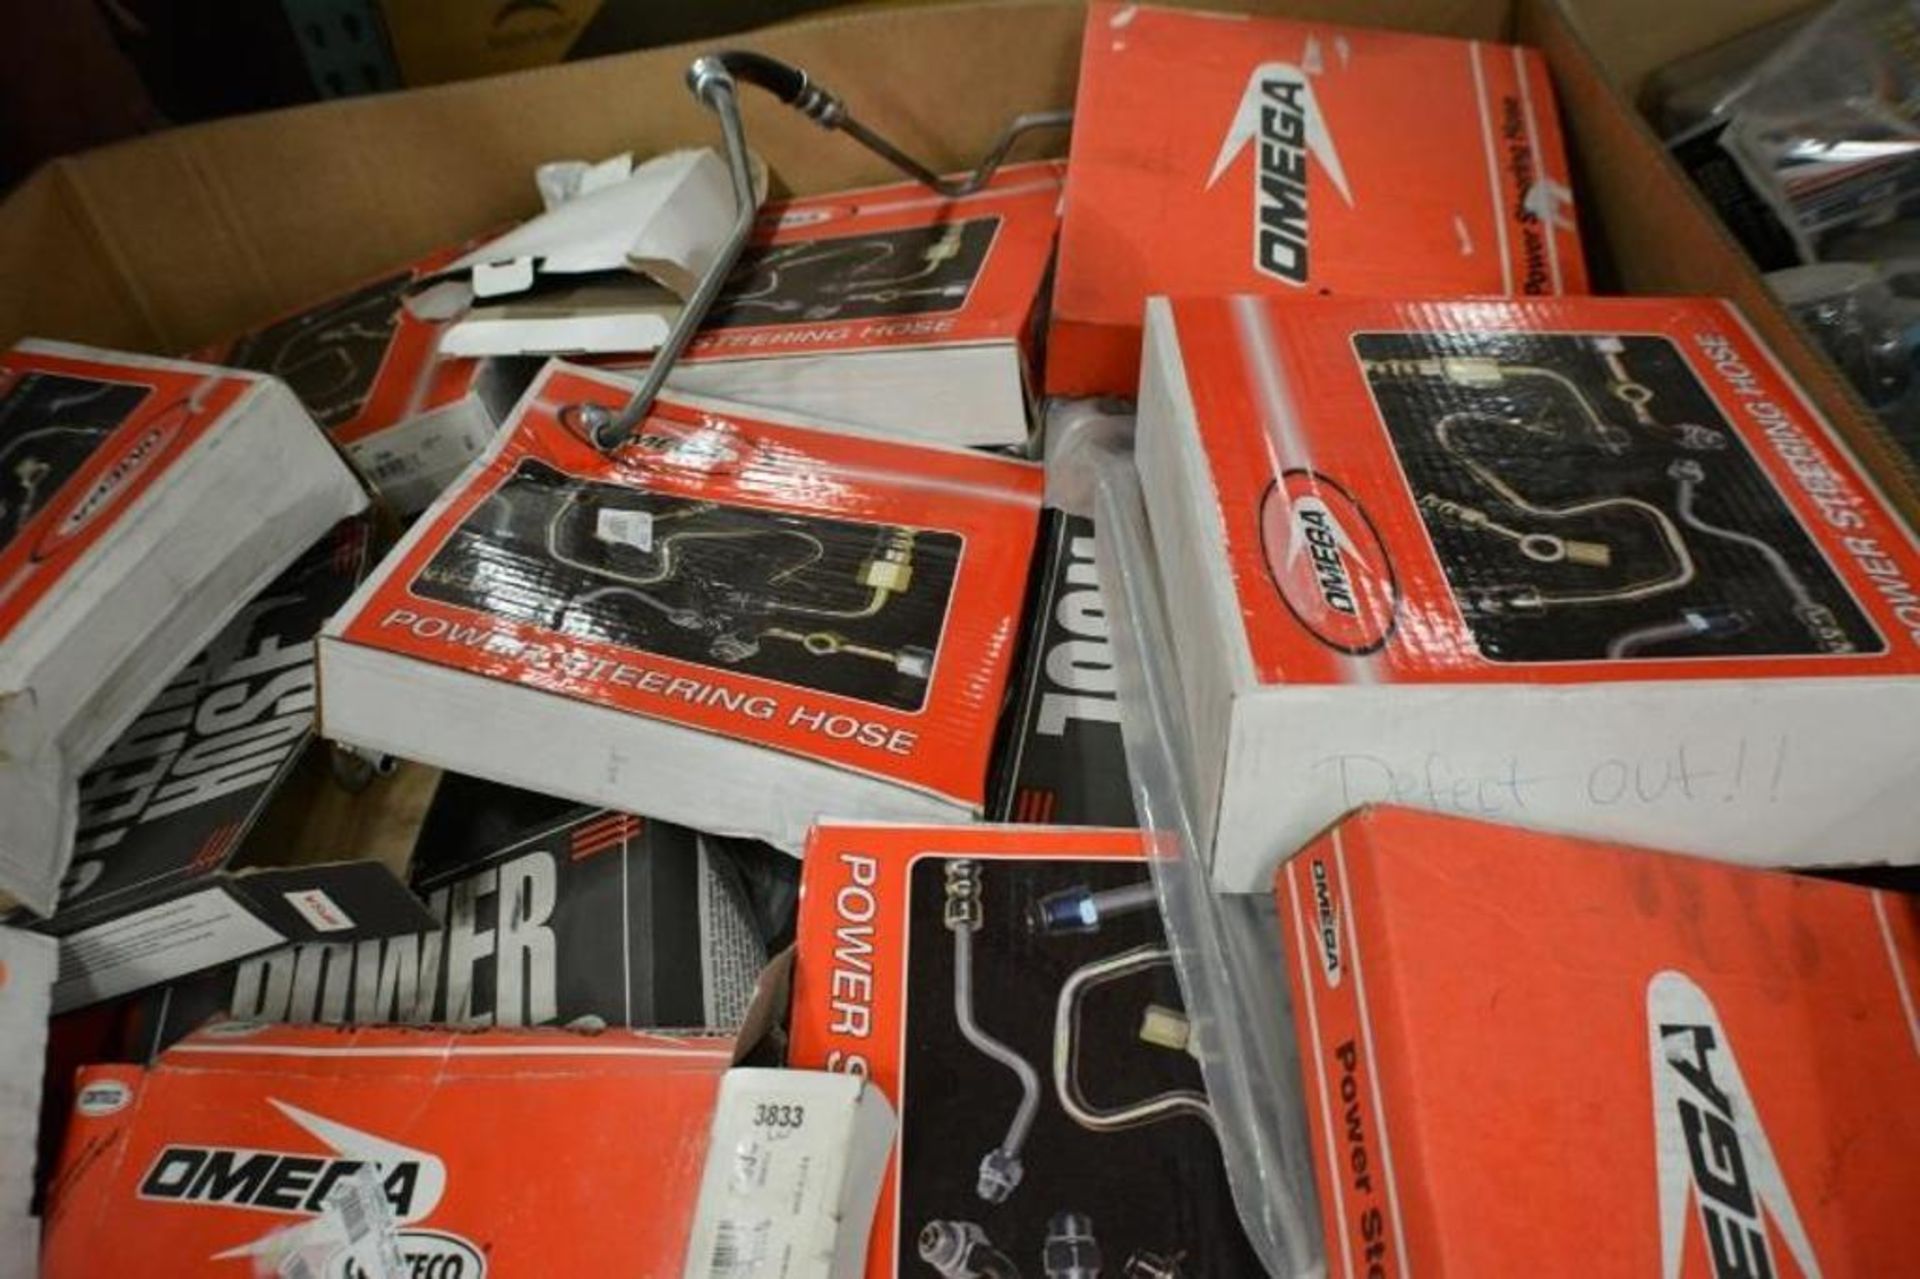 Auto Parts. Power Steering Hoses. Assorted Sizes. Contents of Pallet - Image 4 of 4